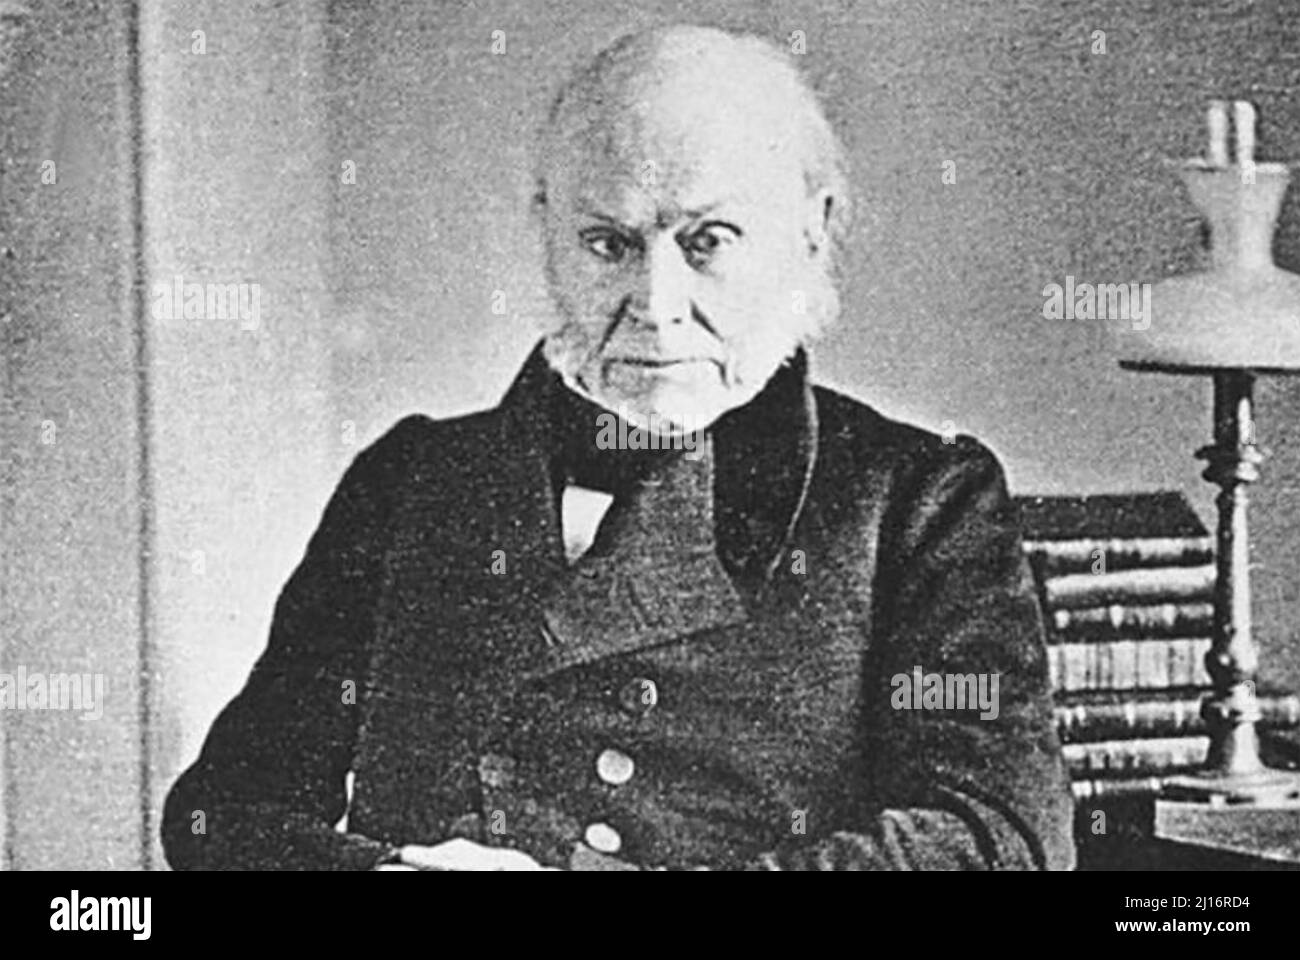 JOHN QUINCY ADAMS (1767-1948) American statesman and lawyer, about 1845 Stock Photo